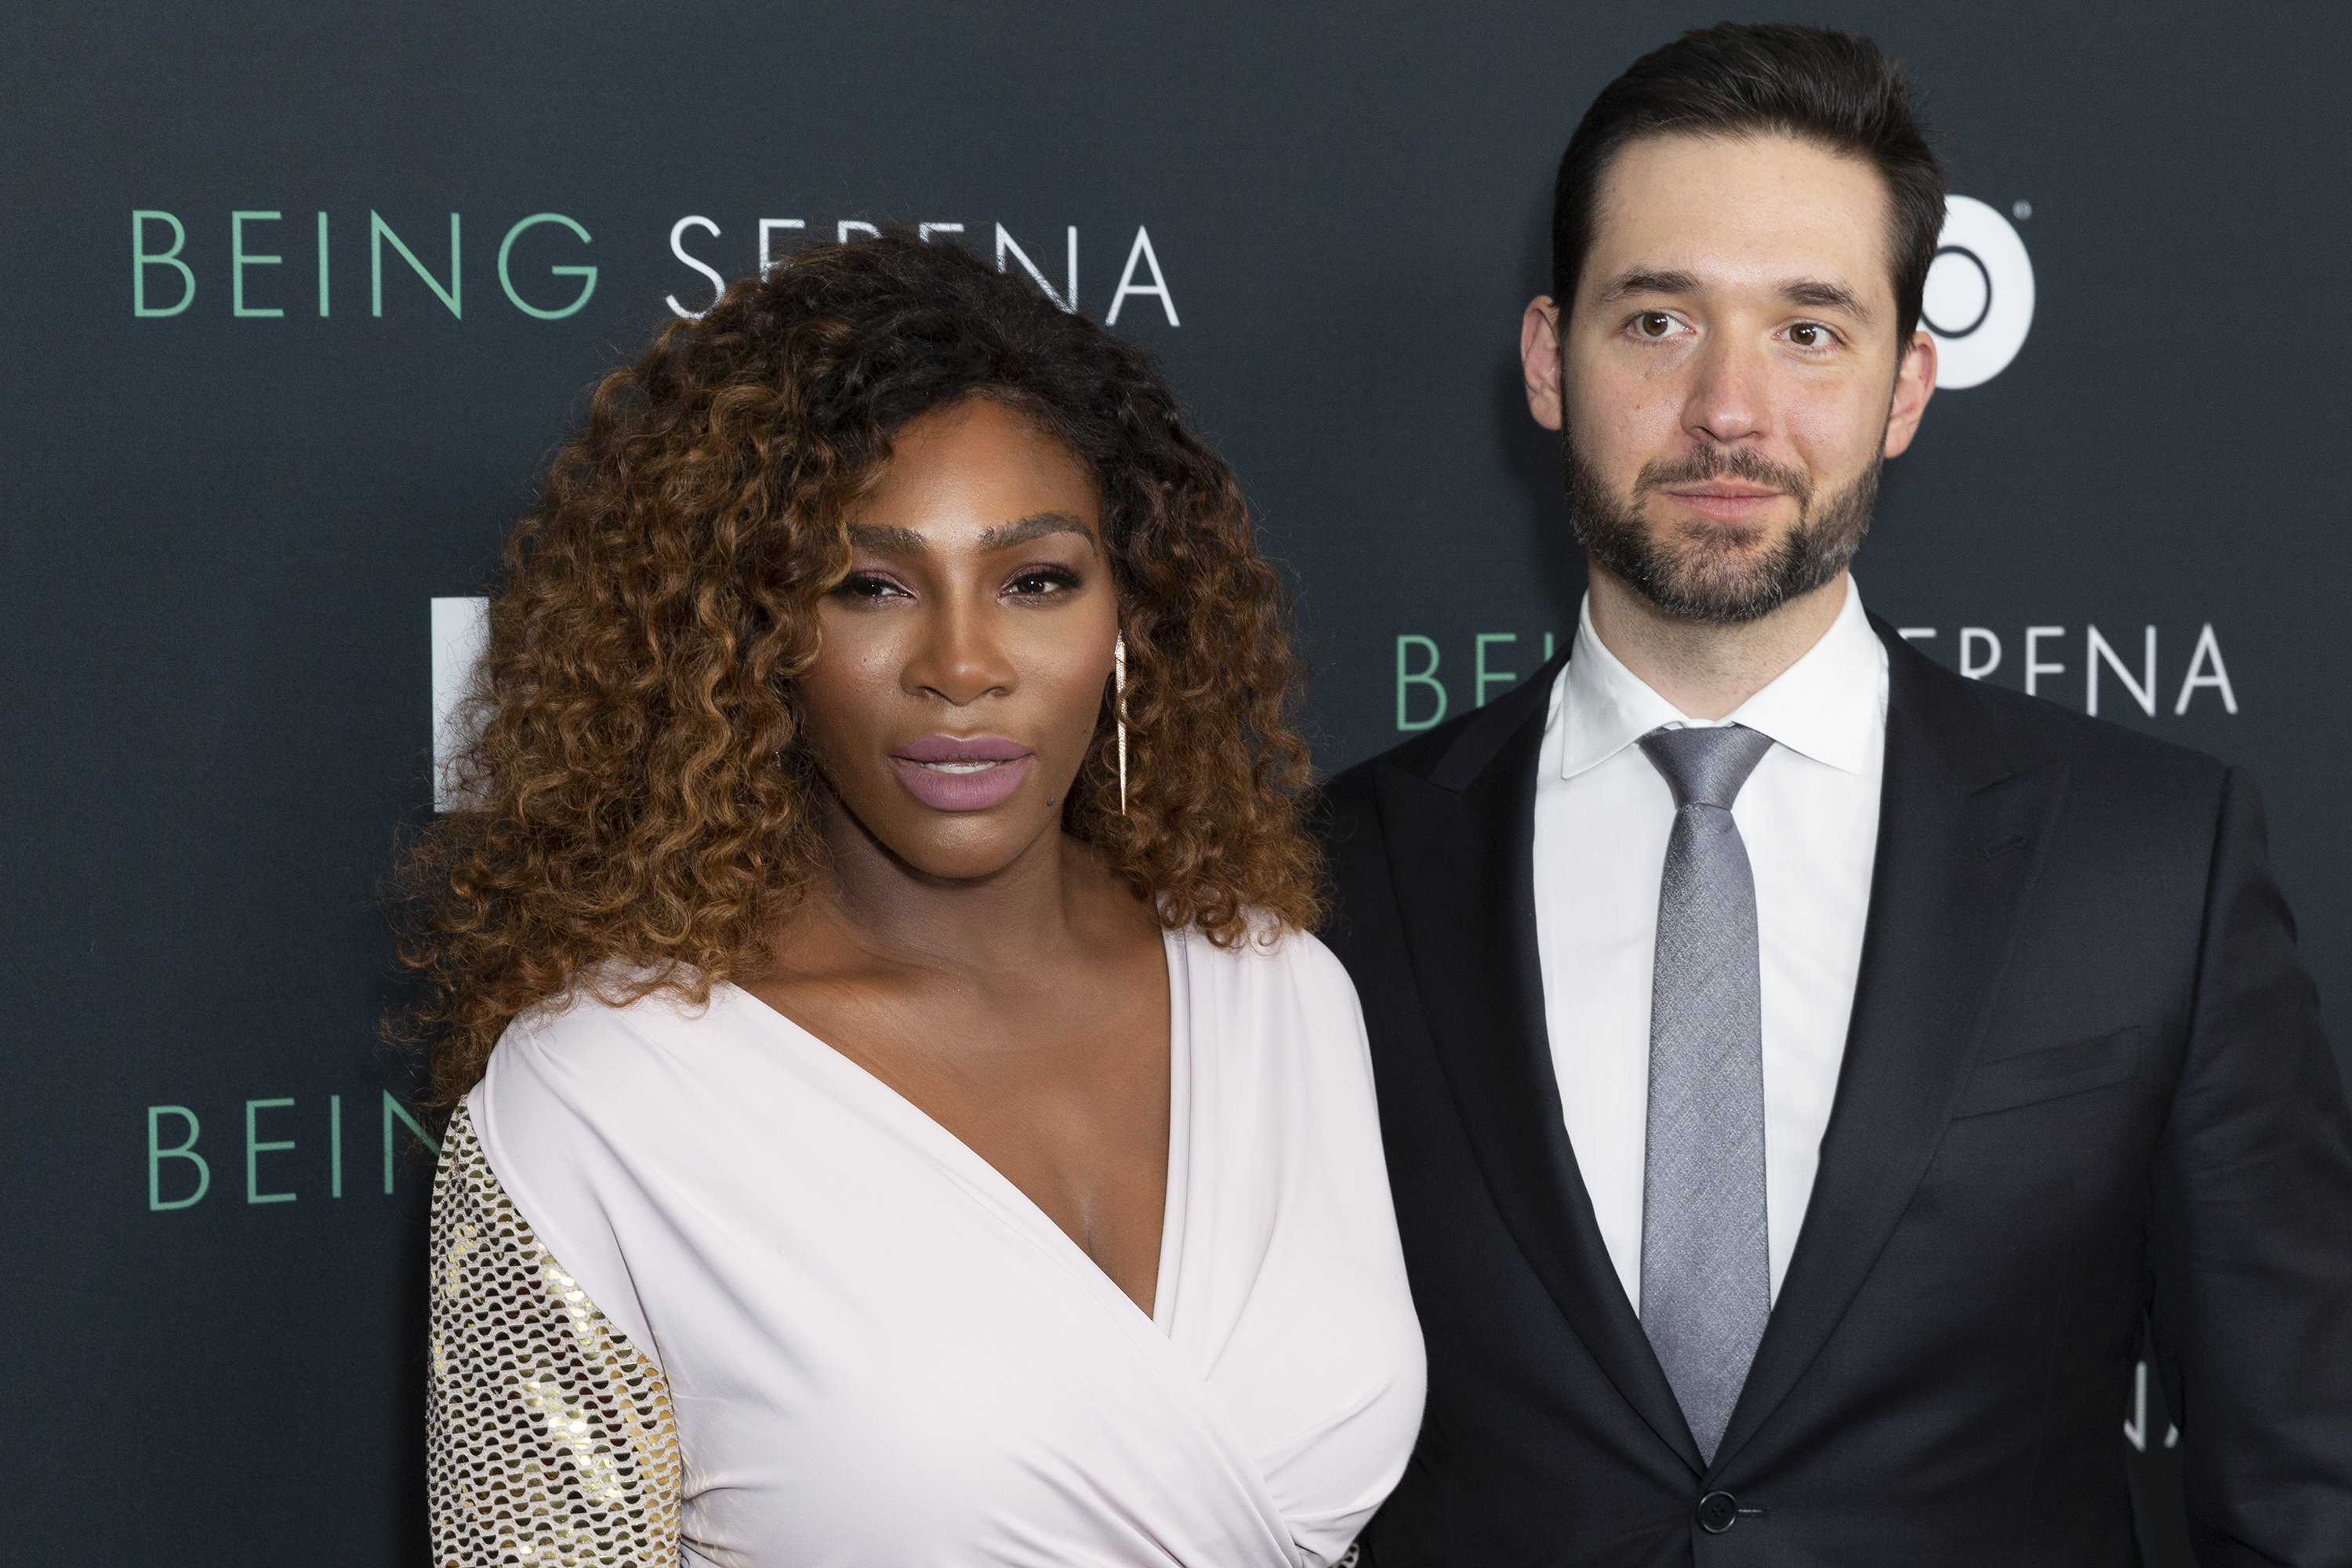 Serena Williams and Alexis Ohanian at the premiere of "Being Serena" on April 25, 2018, in New York. | Source: Lev Radin/Pacific Press/LightRocket/Getty Images